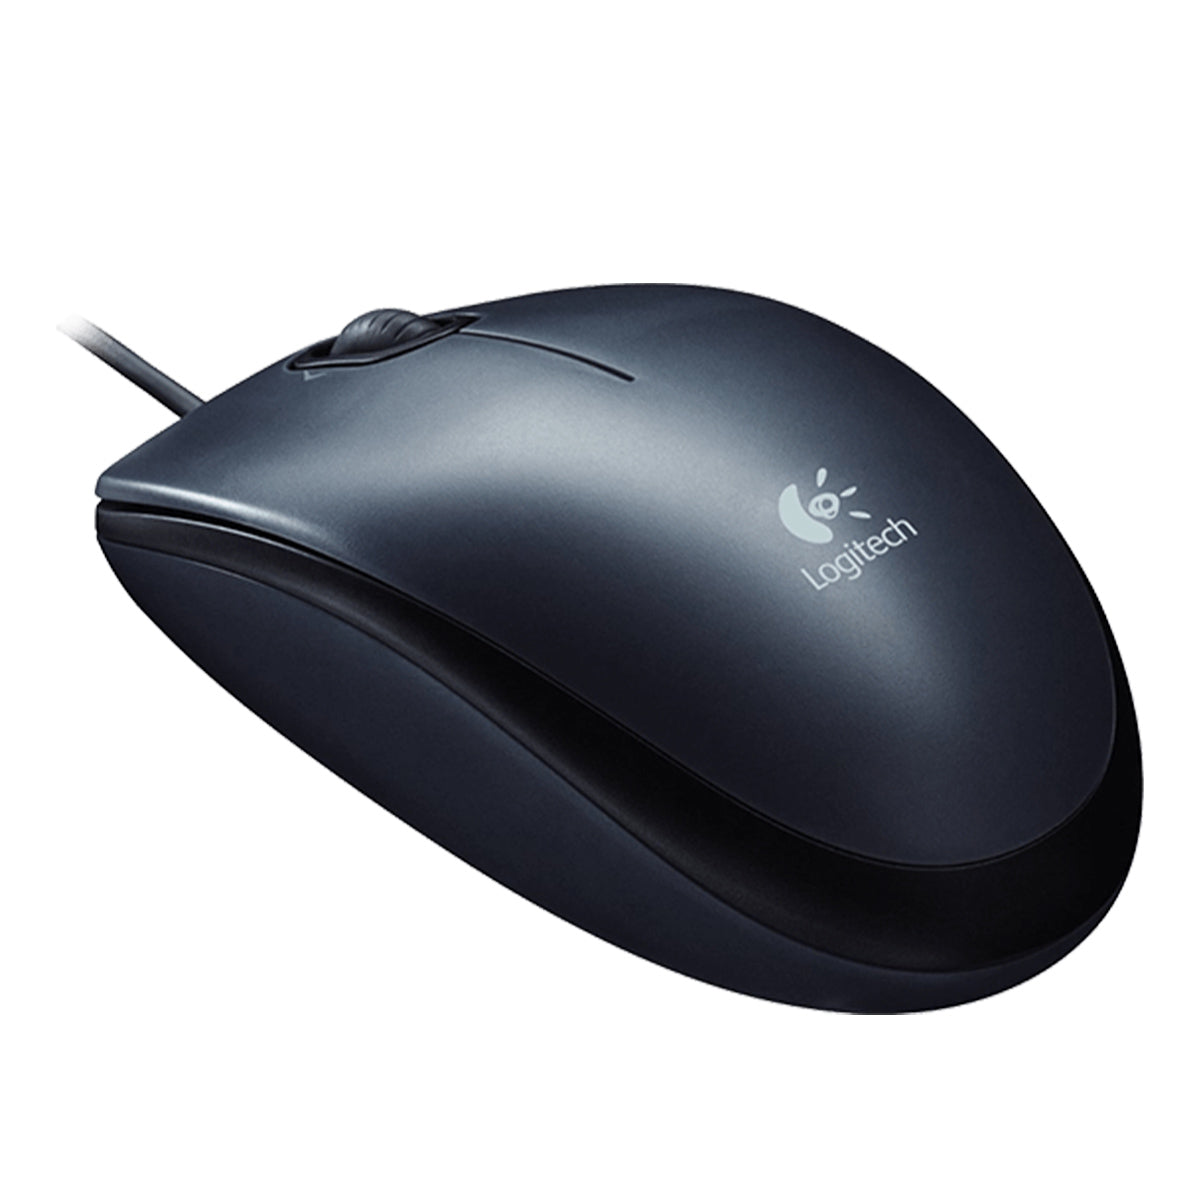 Logitech M90 Wired Optical Mouse with 1000 DPI and Ambidextrous Design